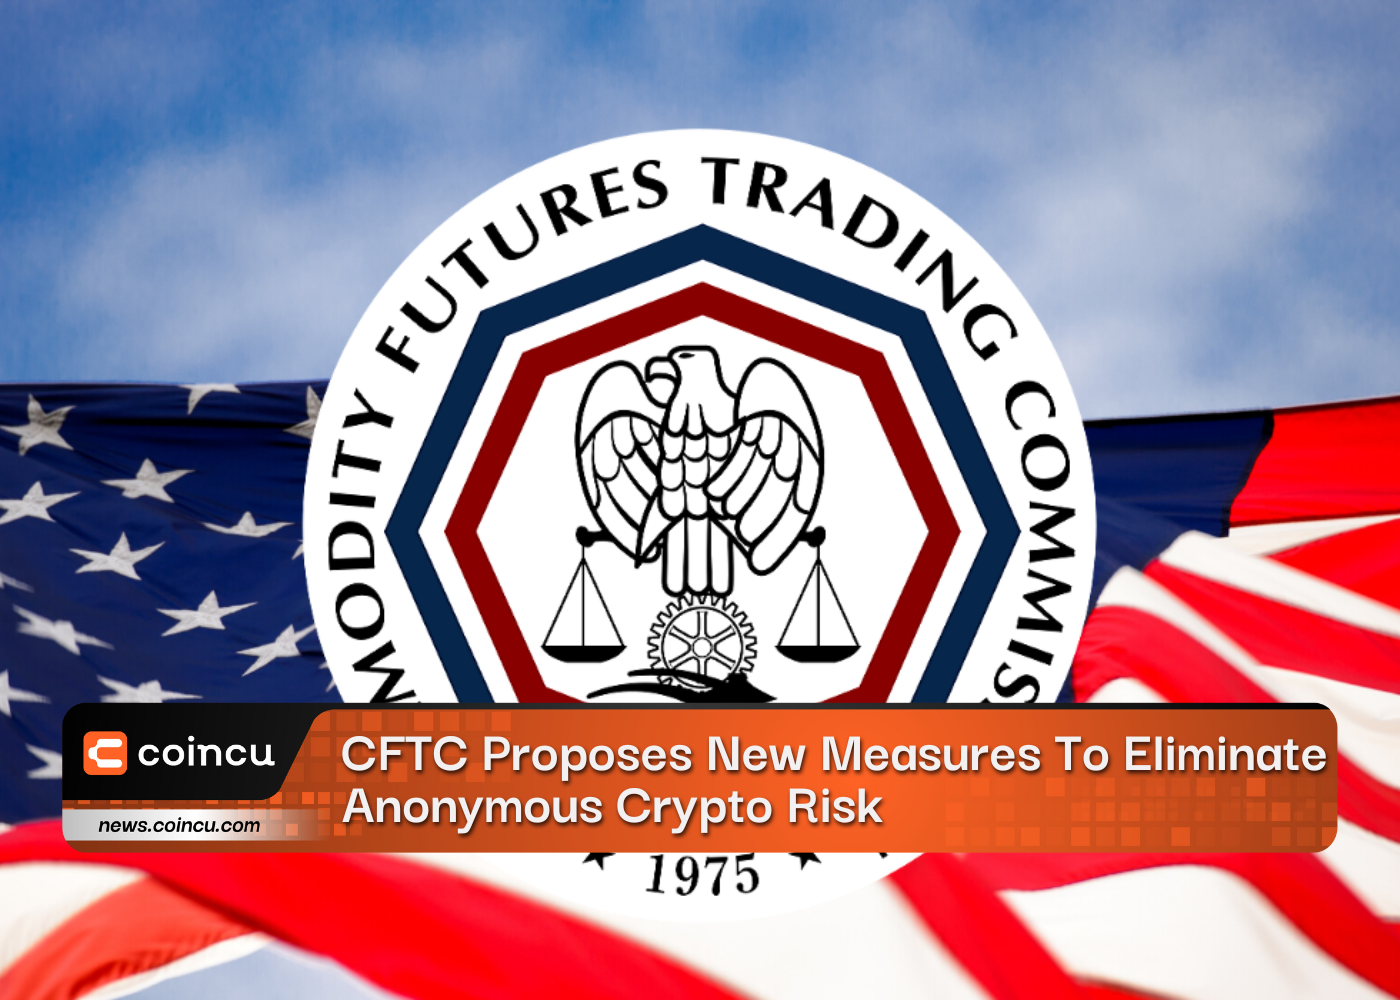 CFTC Proposes New Measures To Eliminate